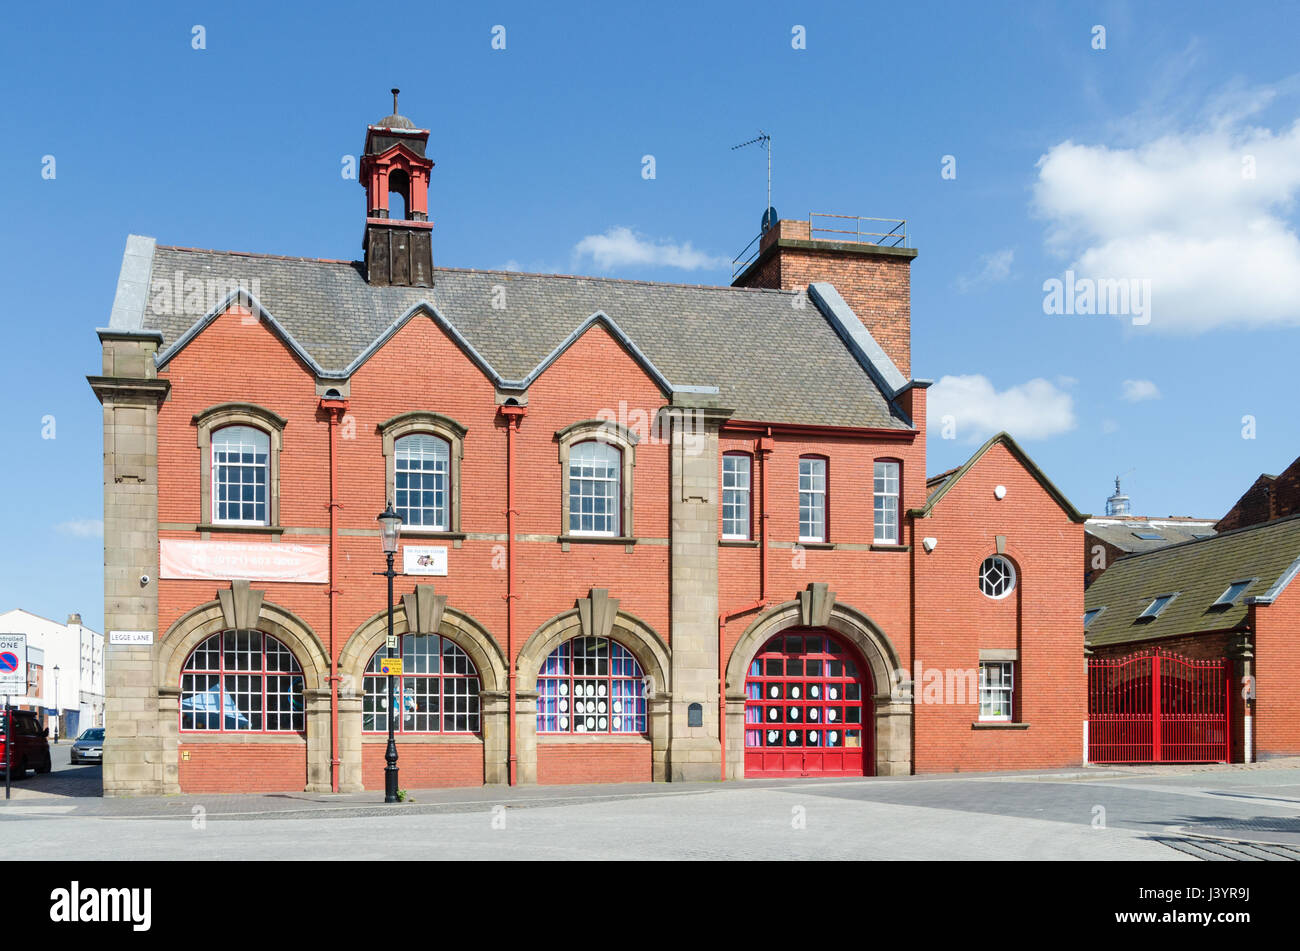 The Old Fire Station Children's Nursery in a converted old fire station in The Jewellery Quarter in Birmingham Stock Photo